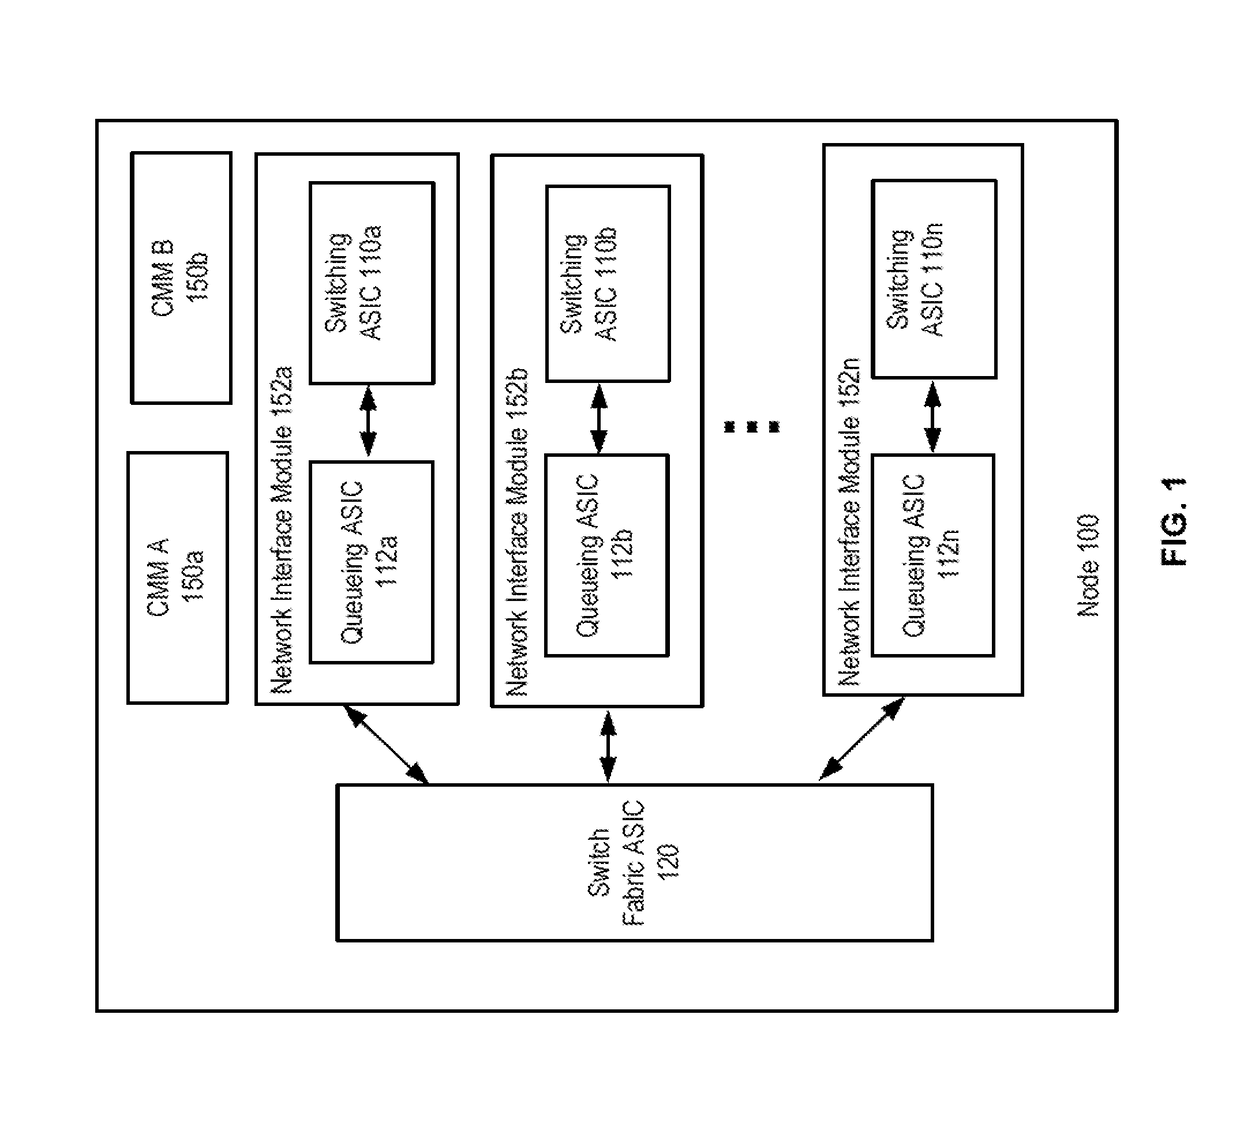 System and method for packet tracing within a packet switching asic